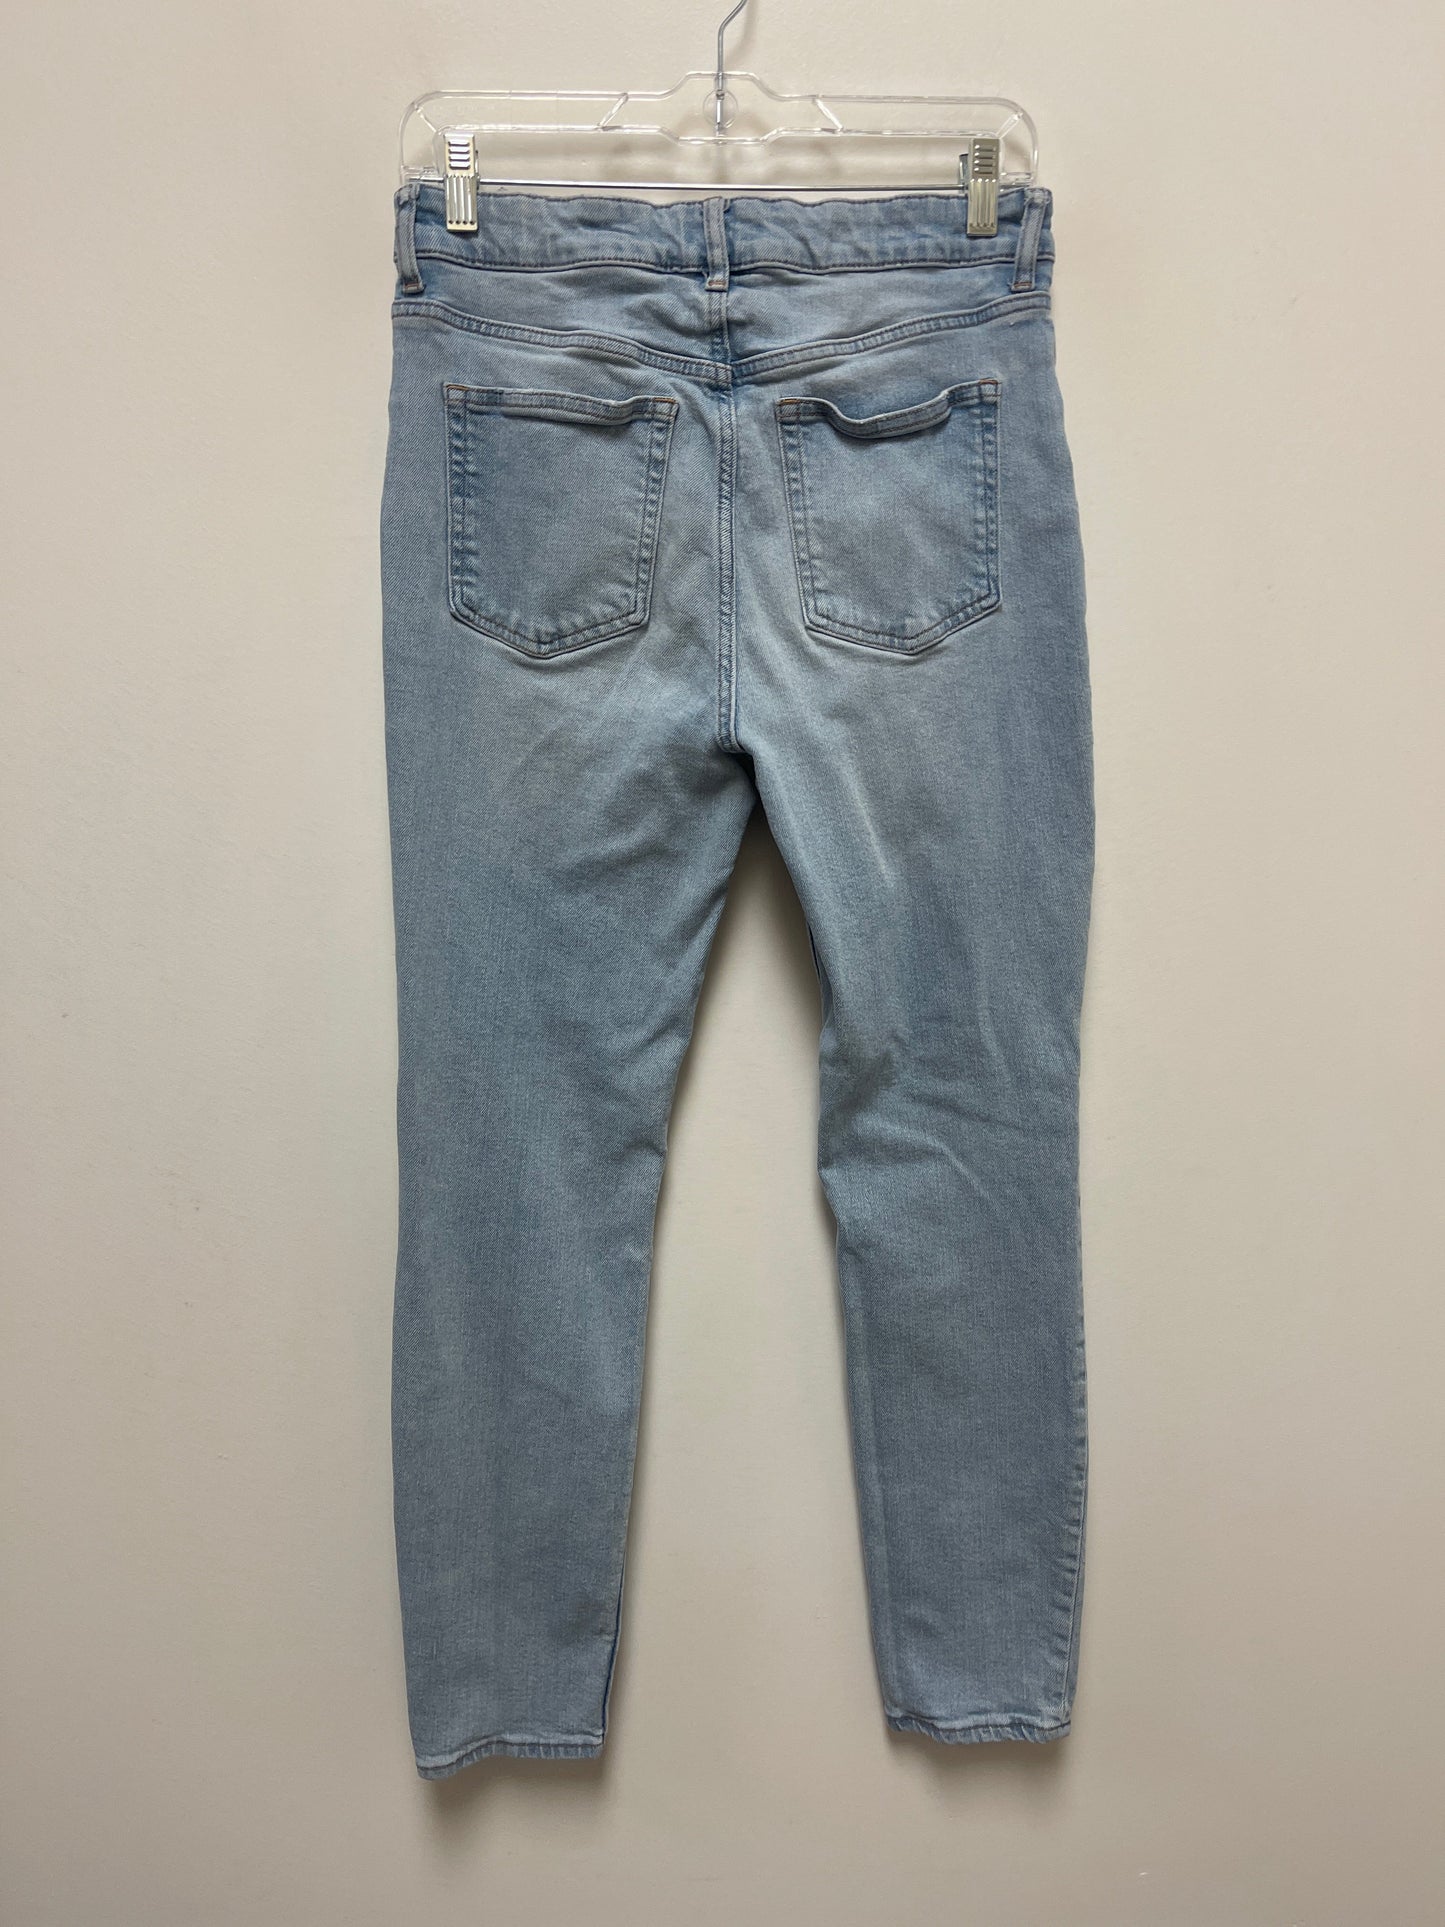 Jeans Skinny By H&m  Size: 10